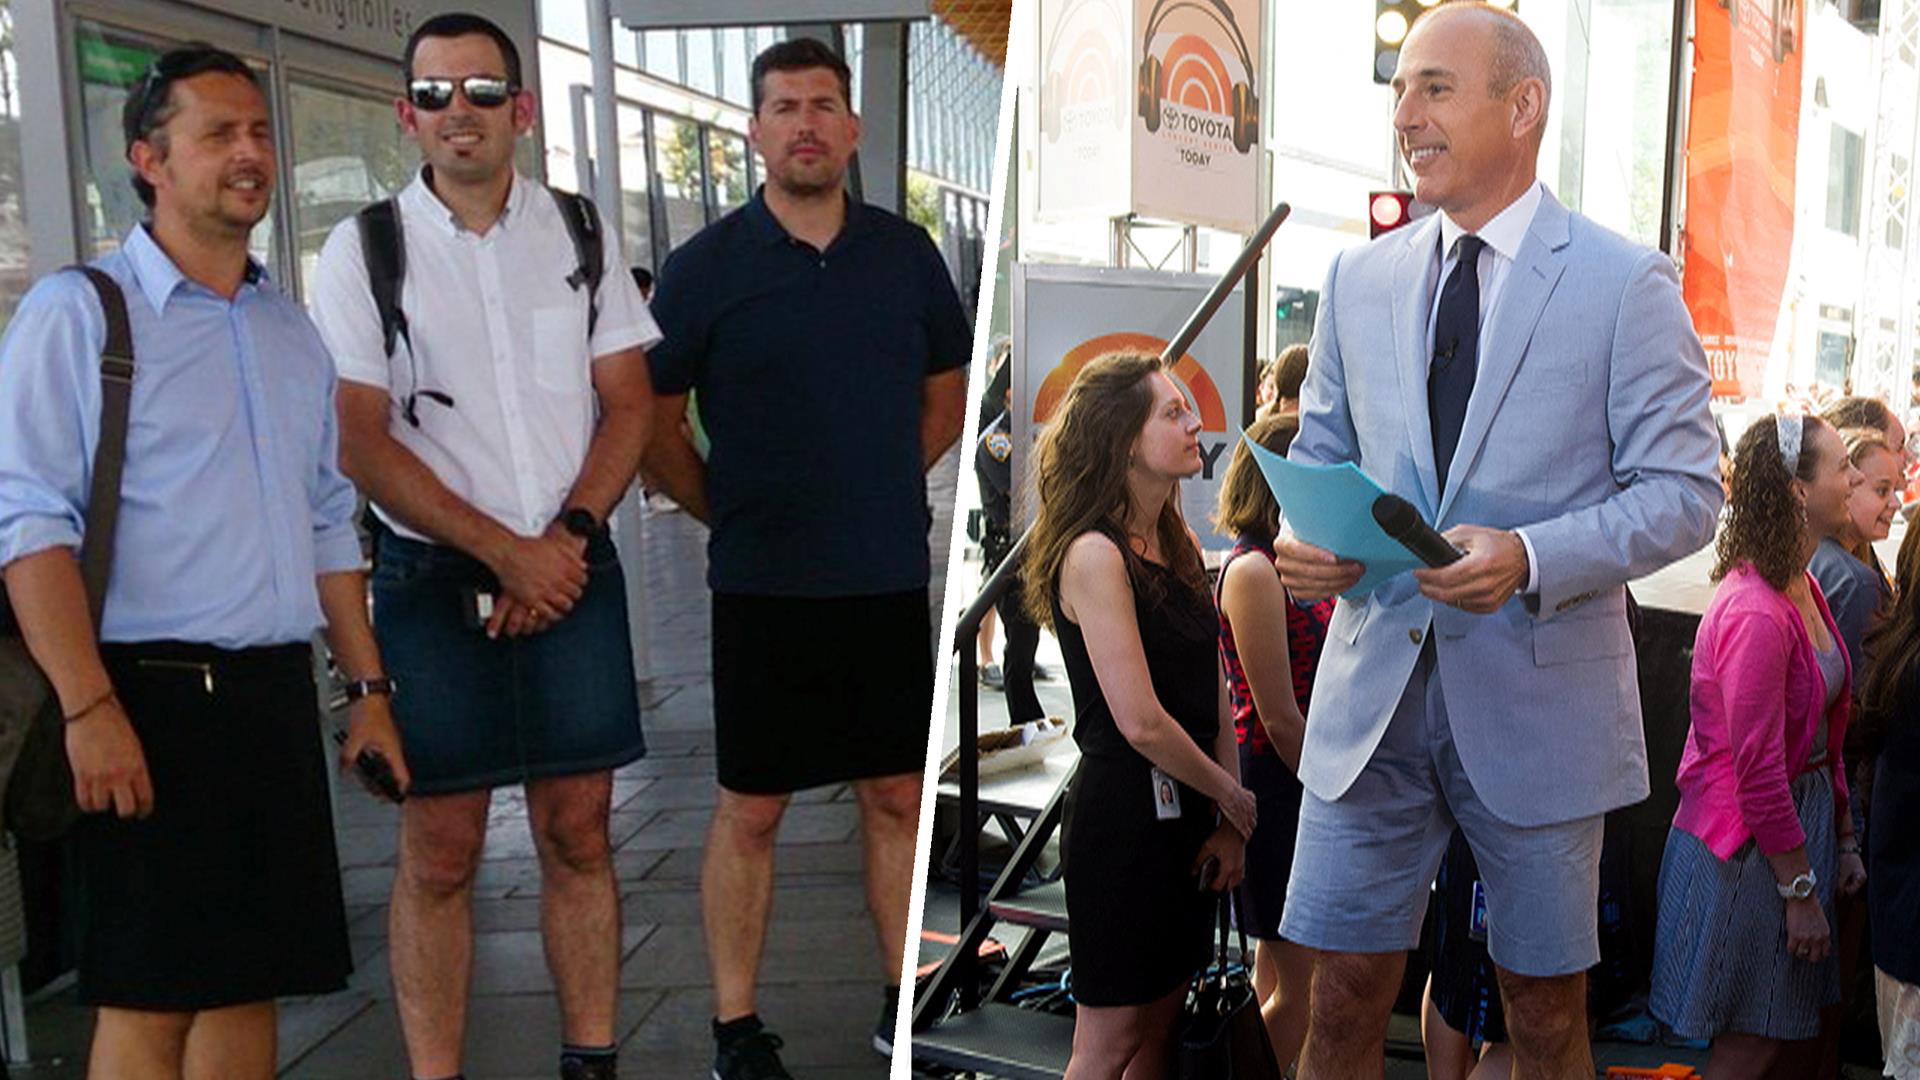 Can men wear shorts in the workplace?